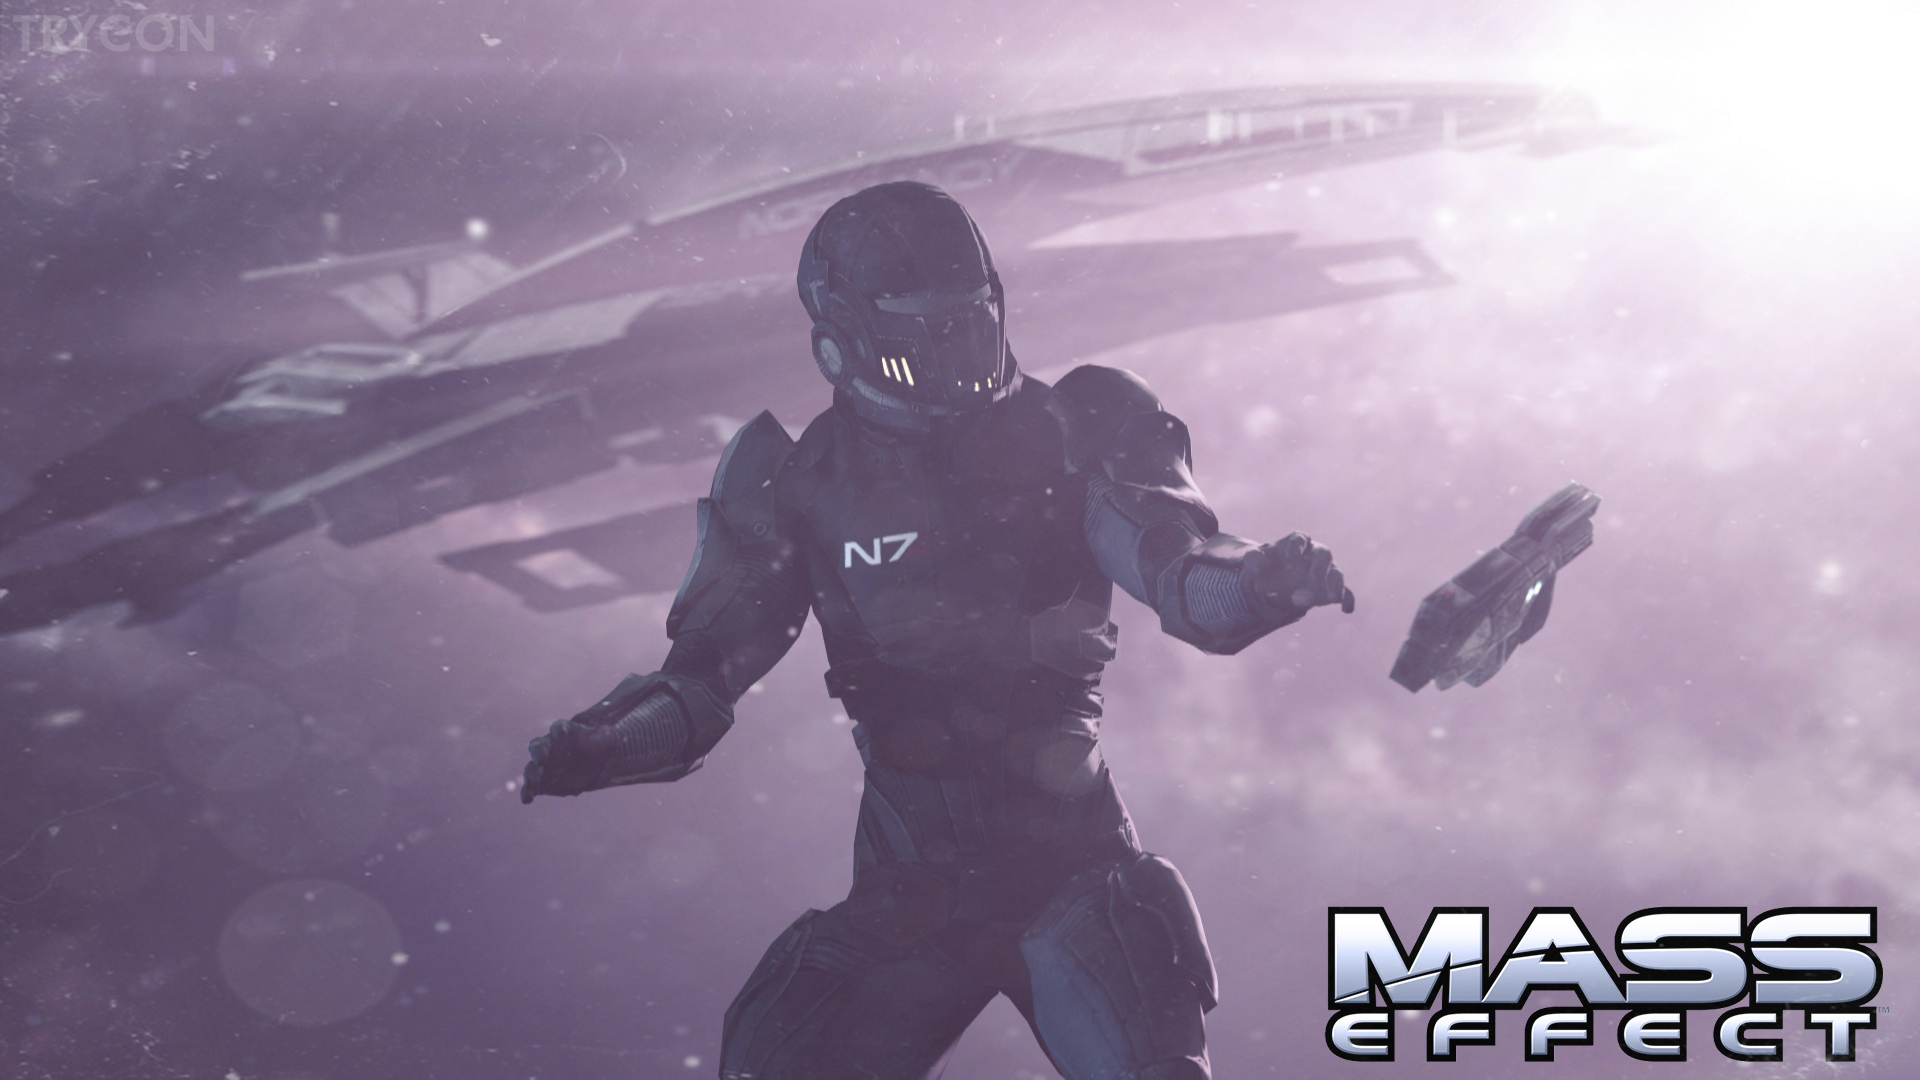 mass_effect_by_trycon1980-d8yphr0.jpg